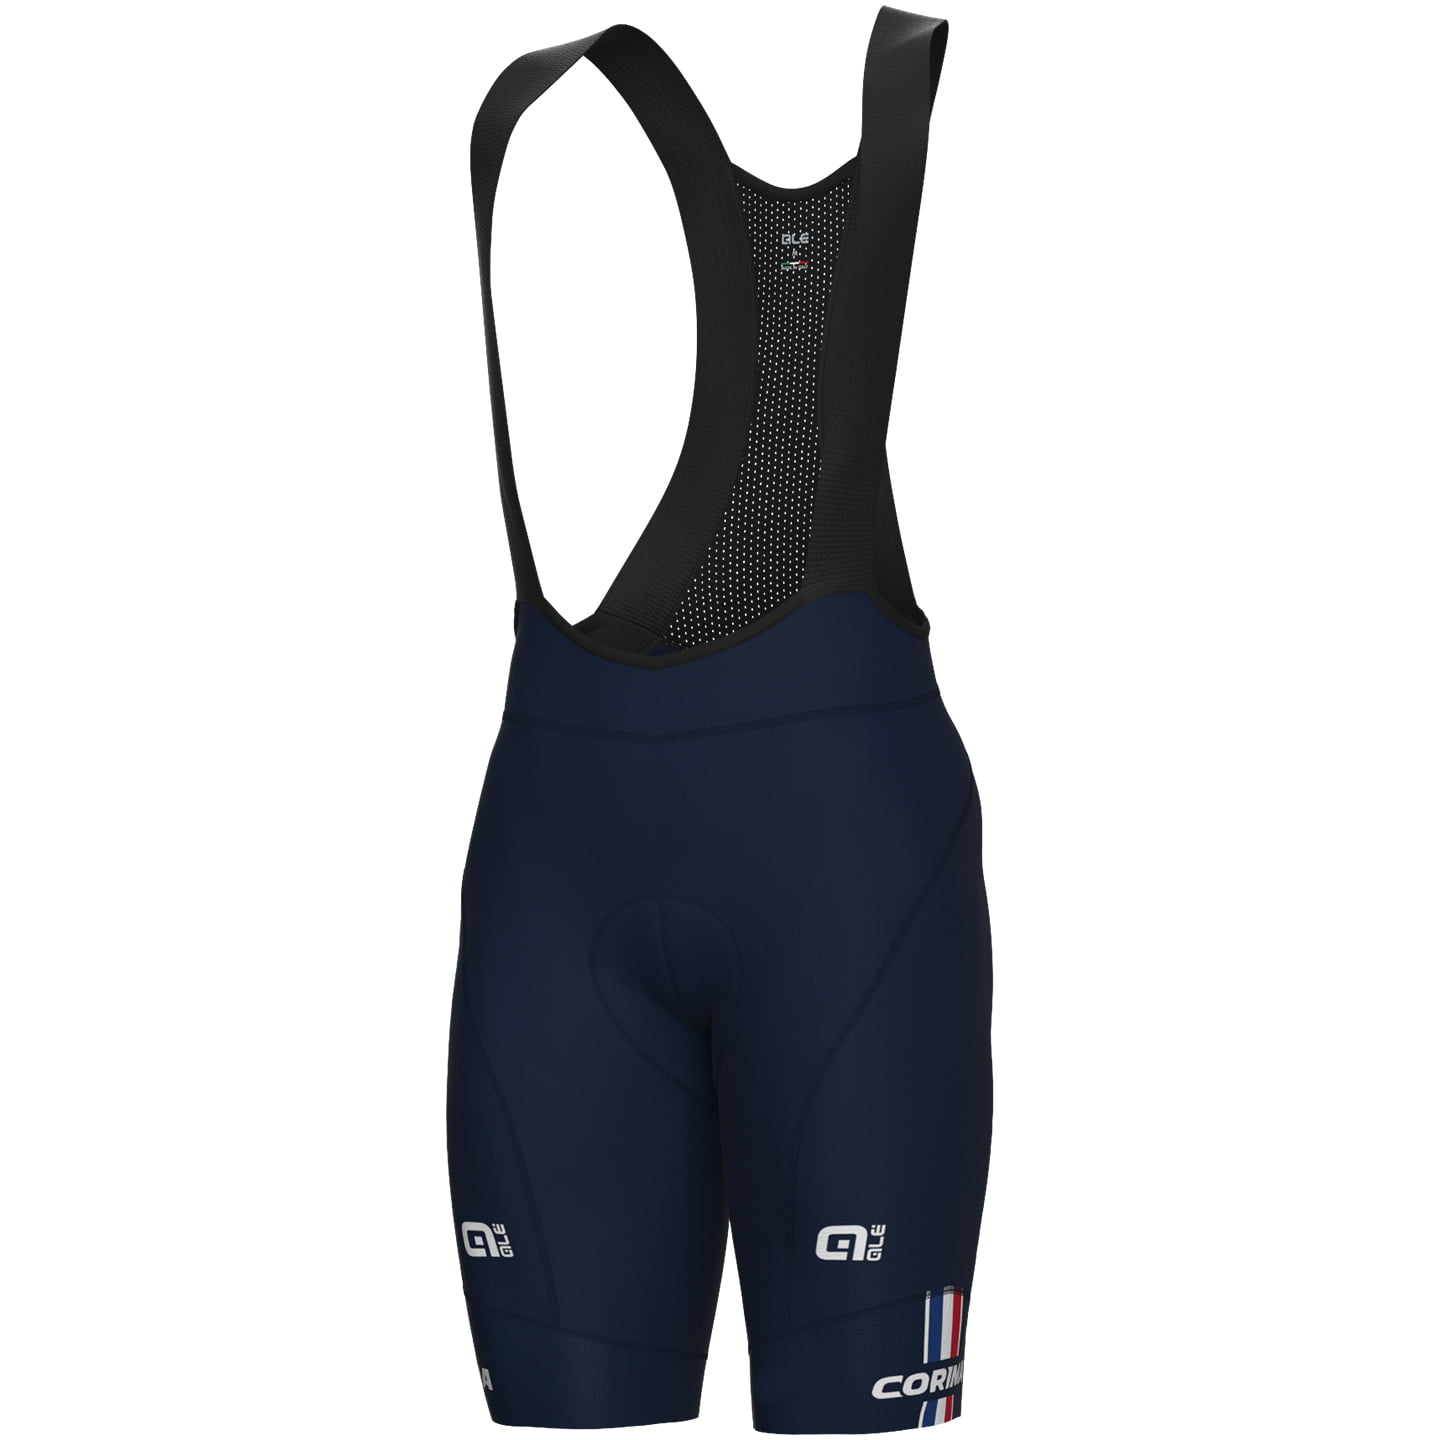 FRENCH NATIONAL TEAM Bib Shorts PR.S 2023, for men, size 2XL, Cycle trousers, Cycle gear